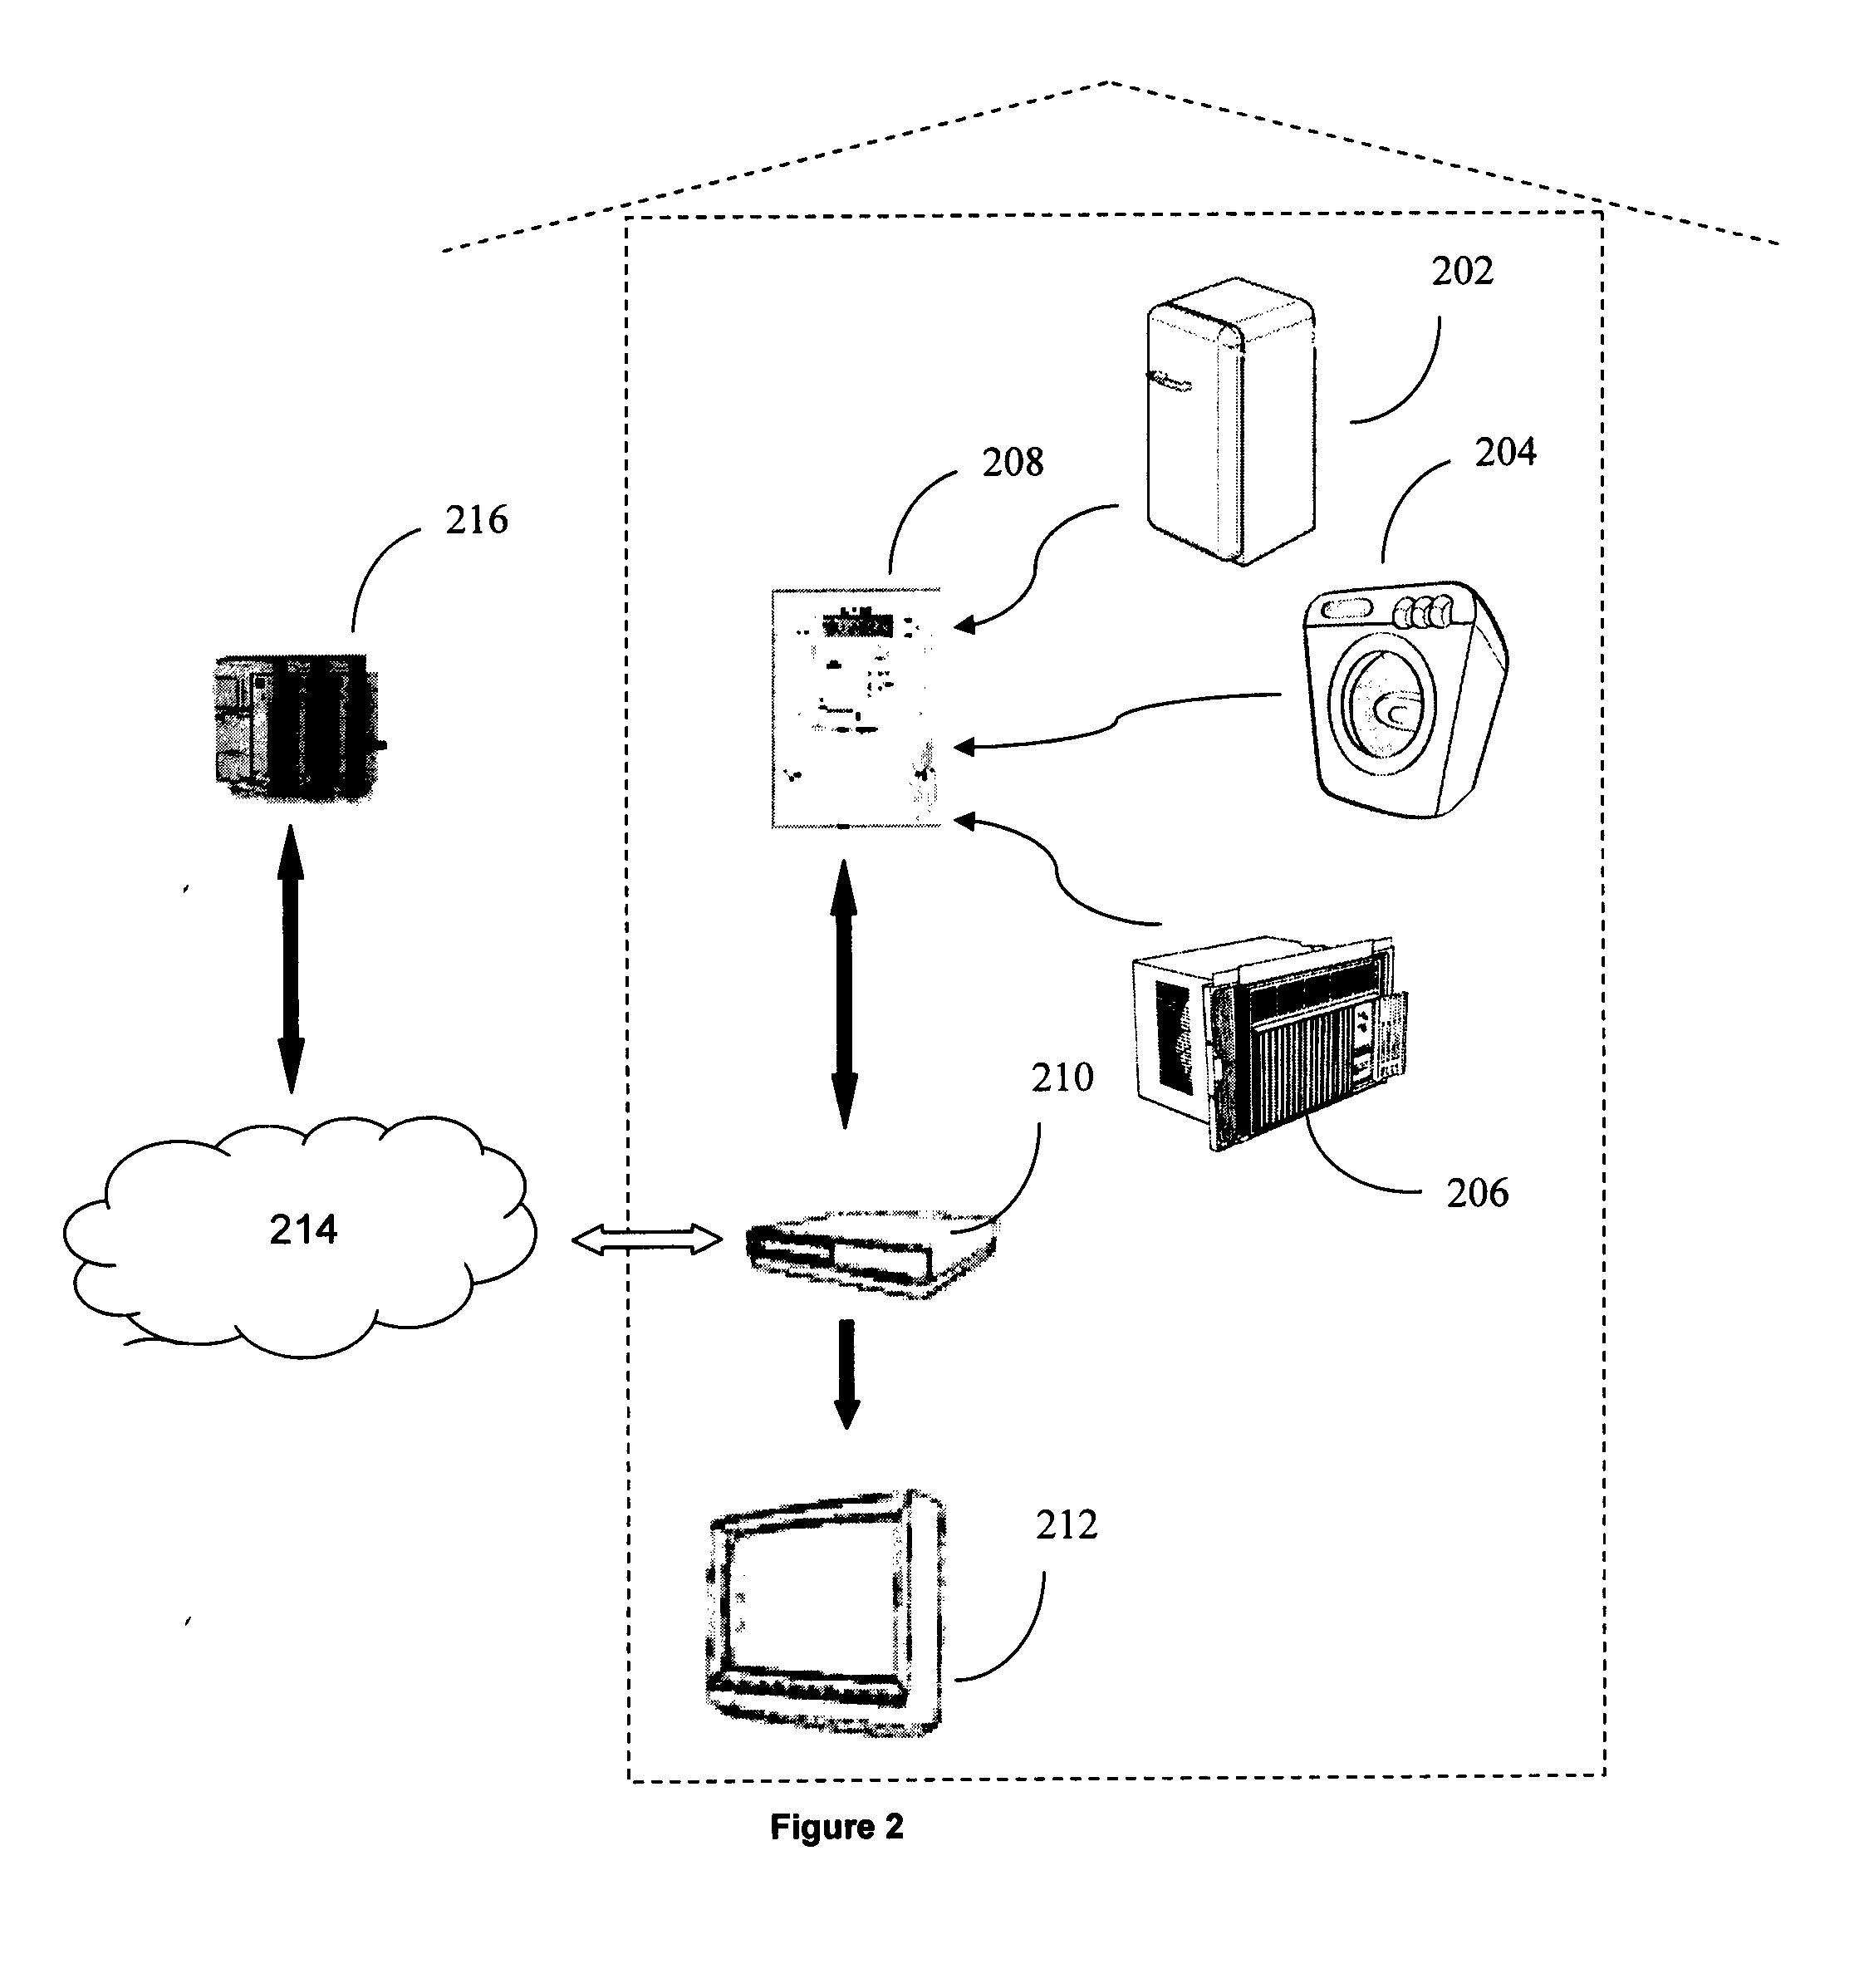 Method and system for effective management of energy consumption by household appliances